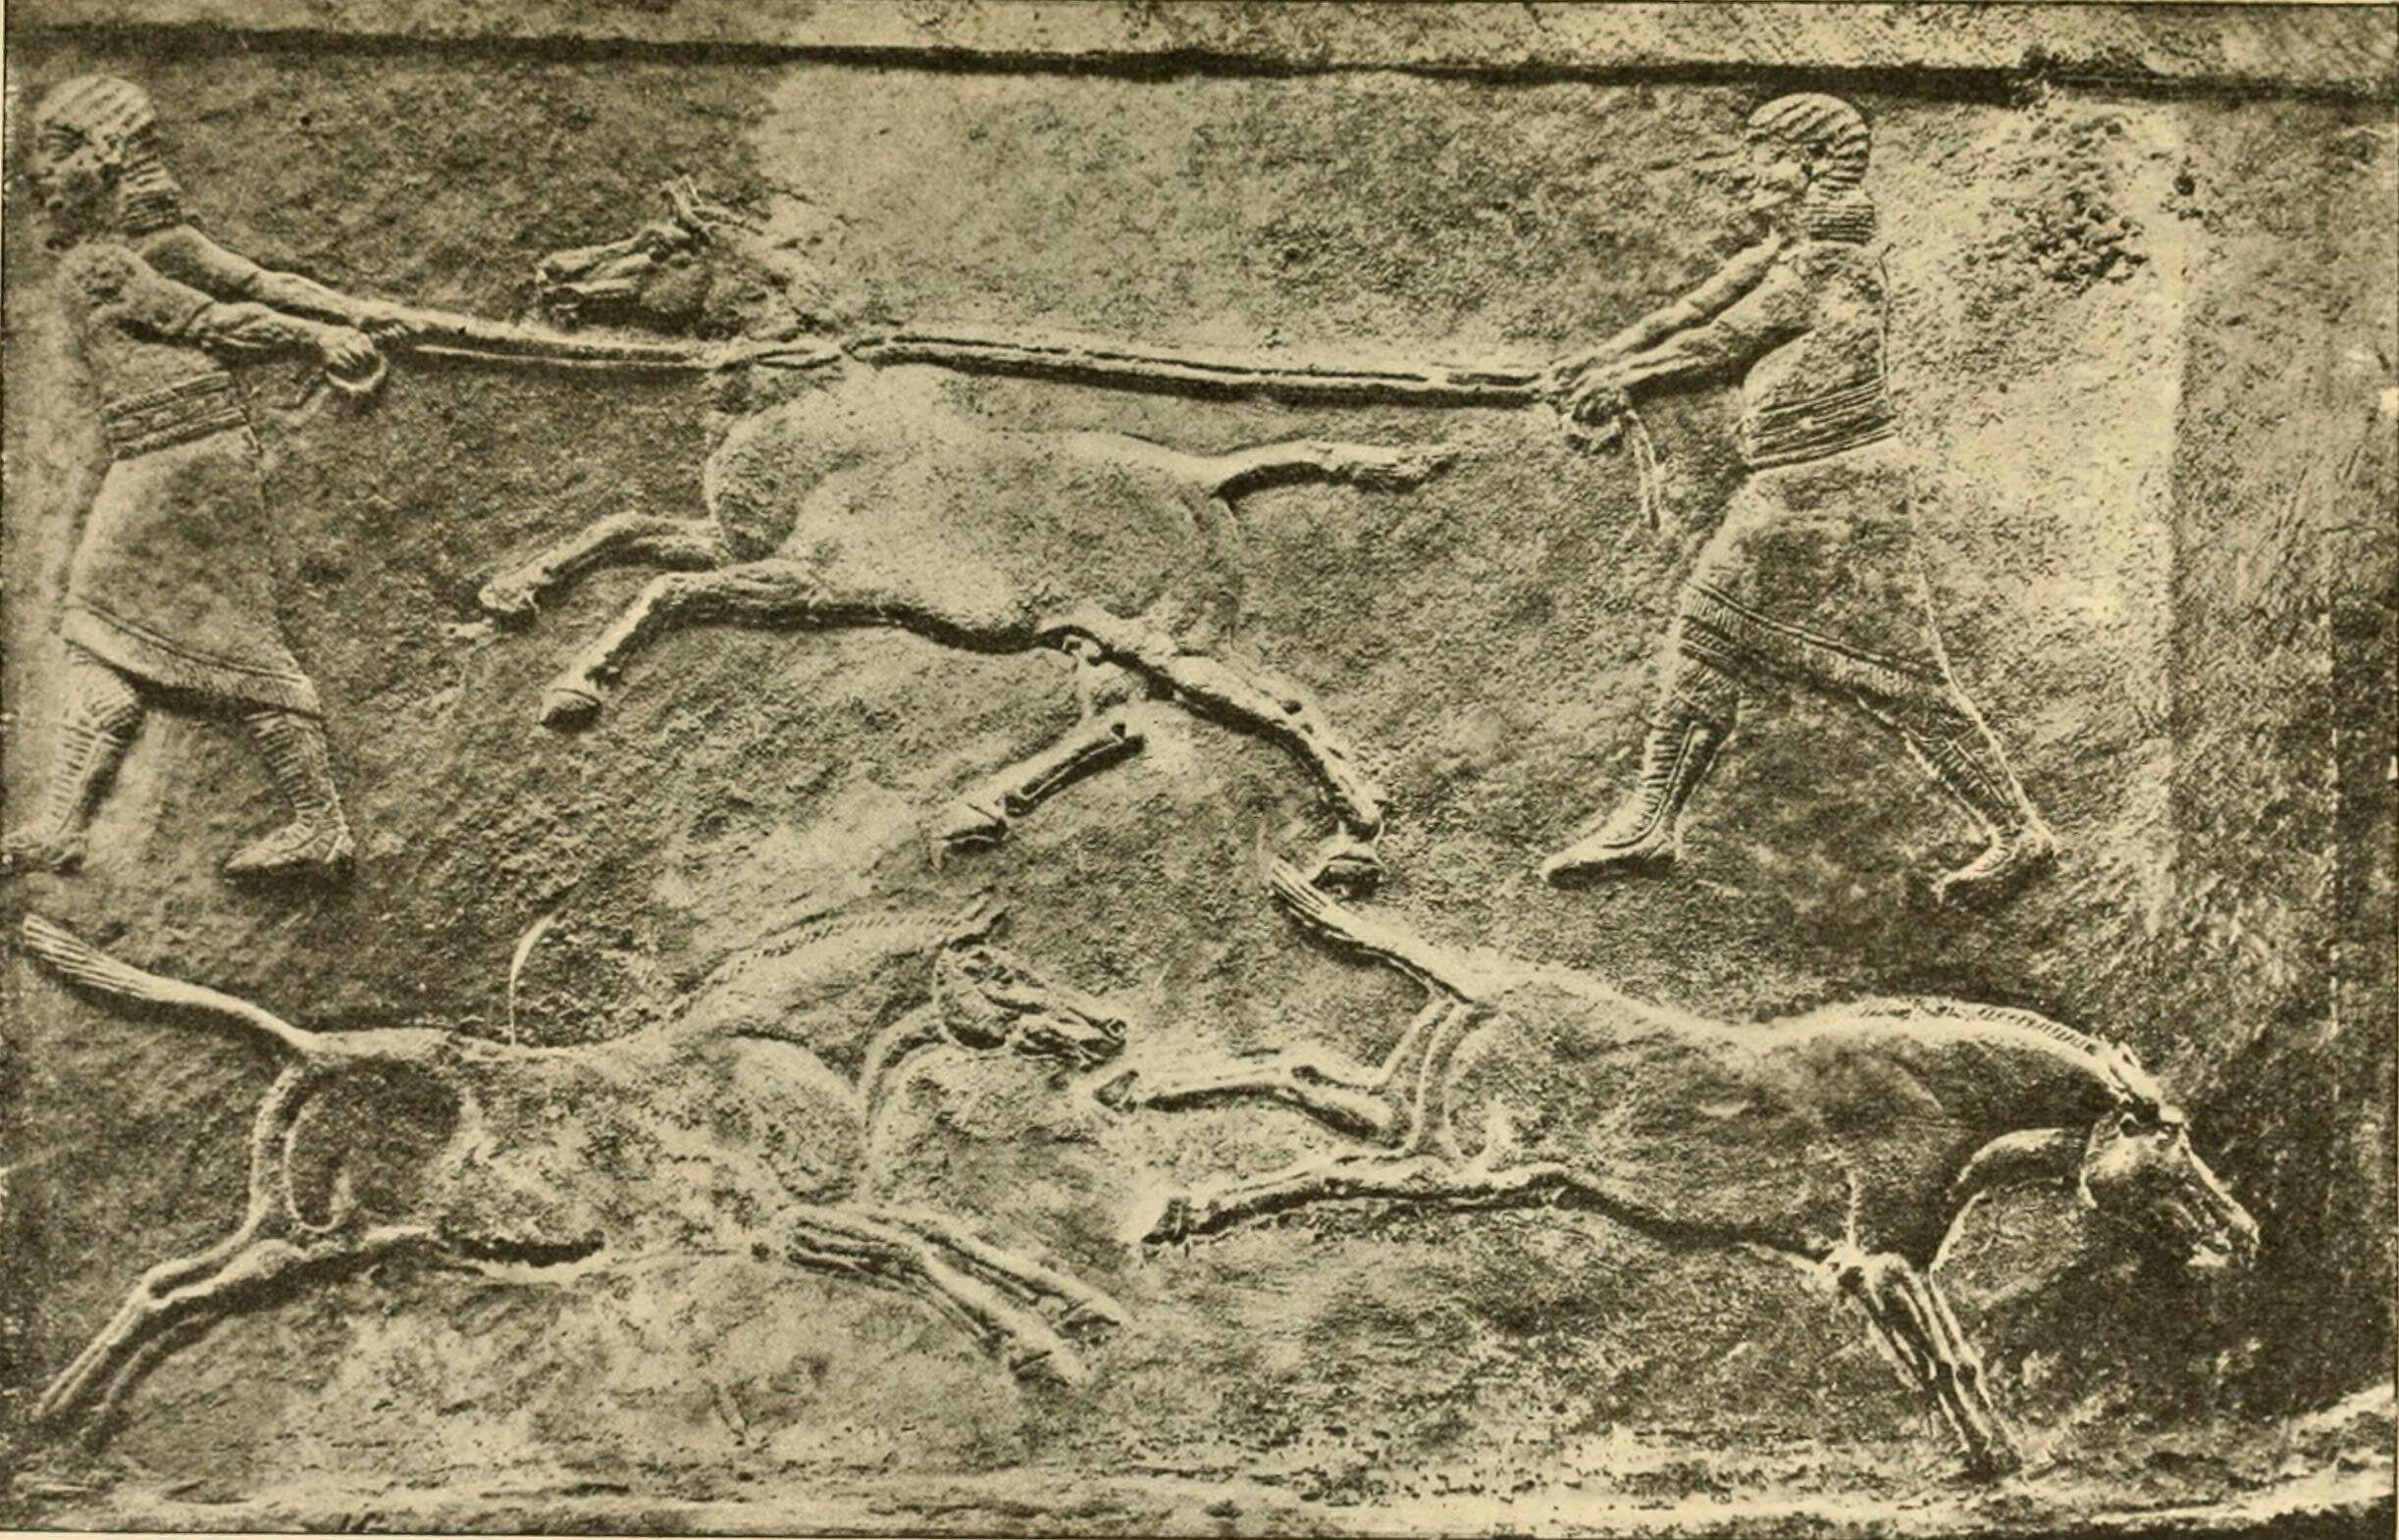 Image of Syrian Wild Ass